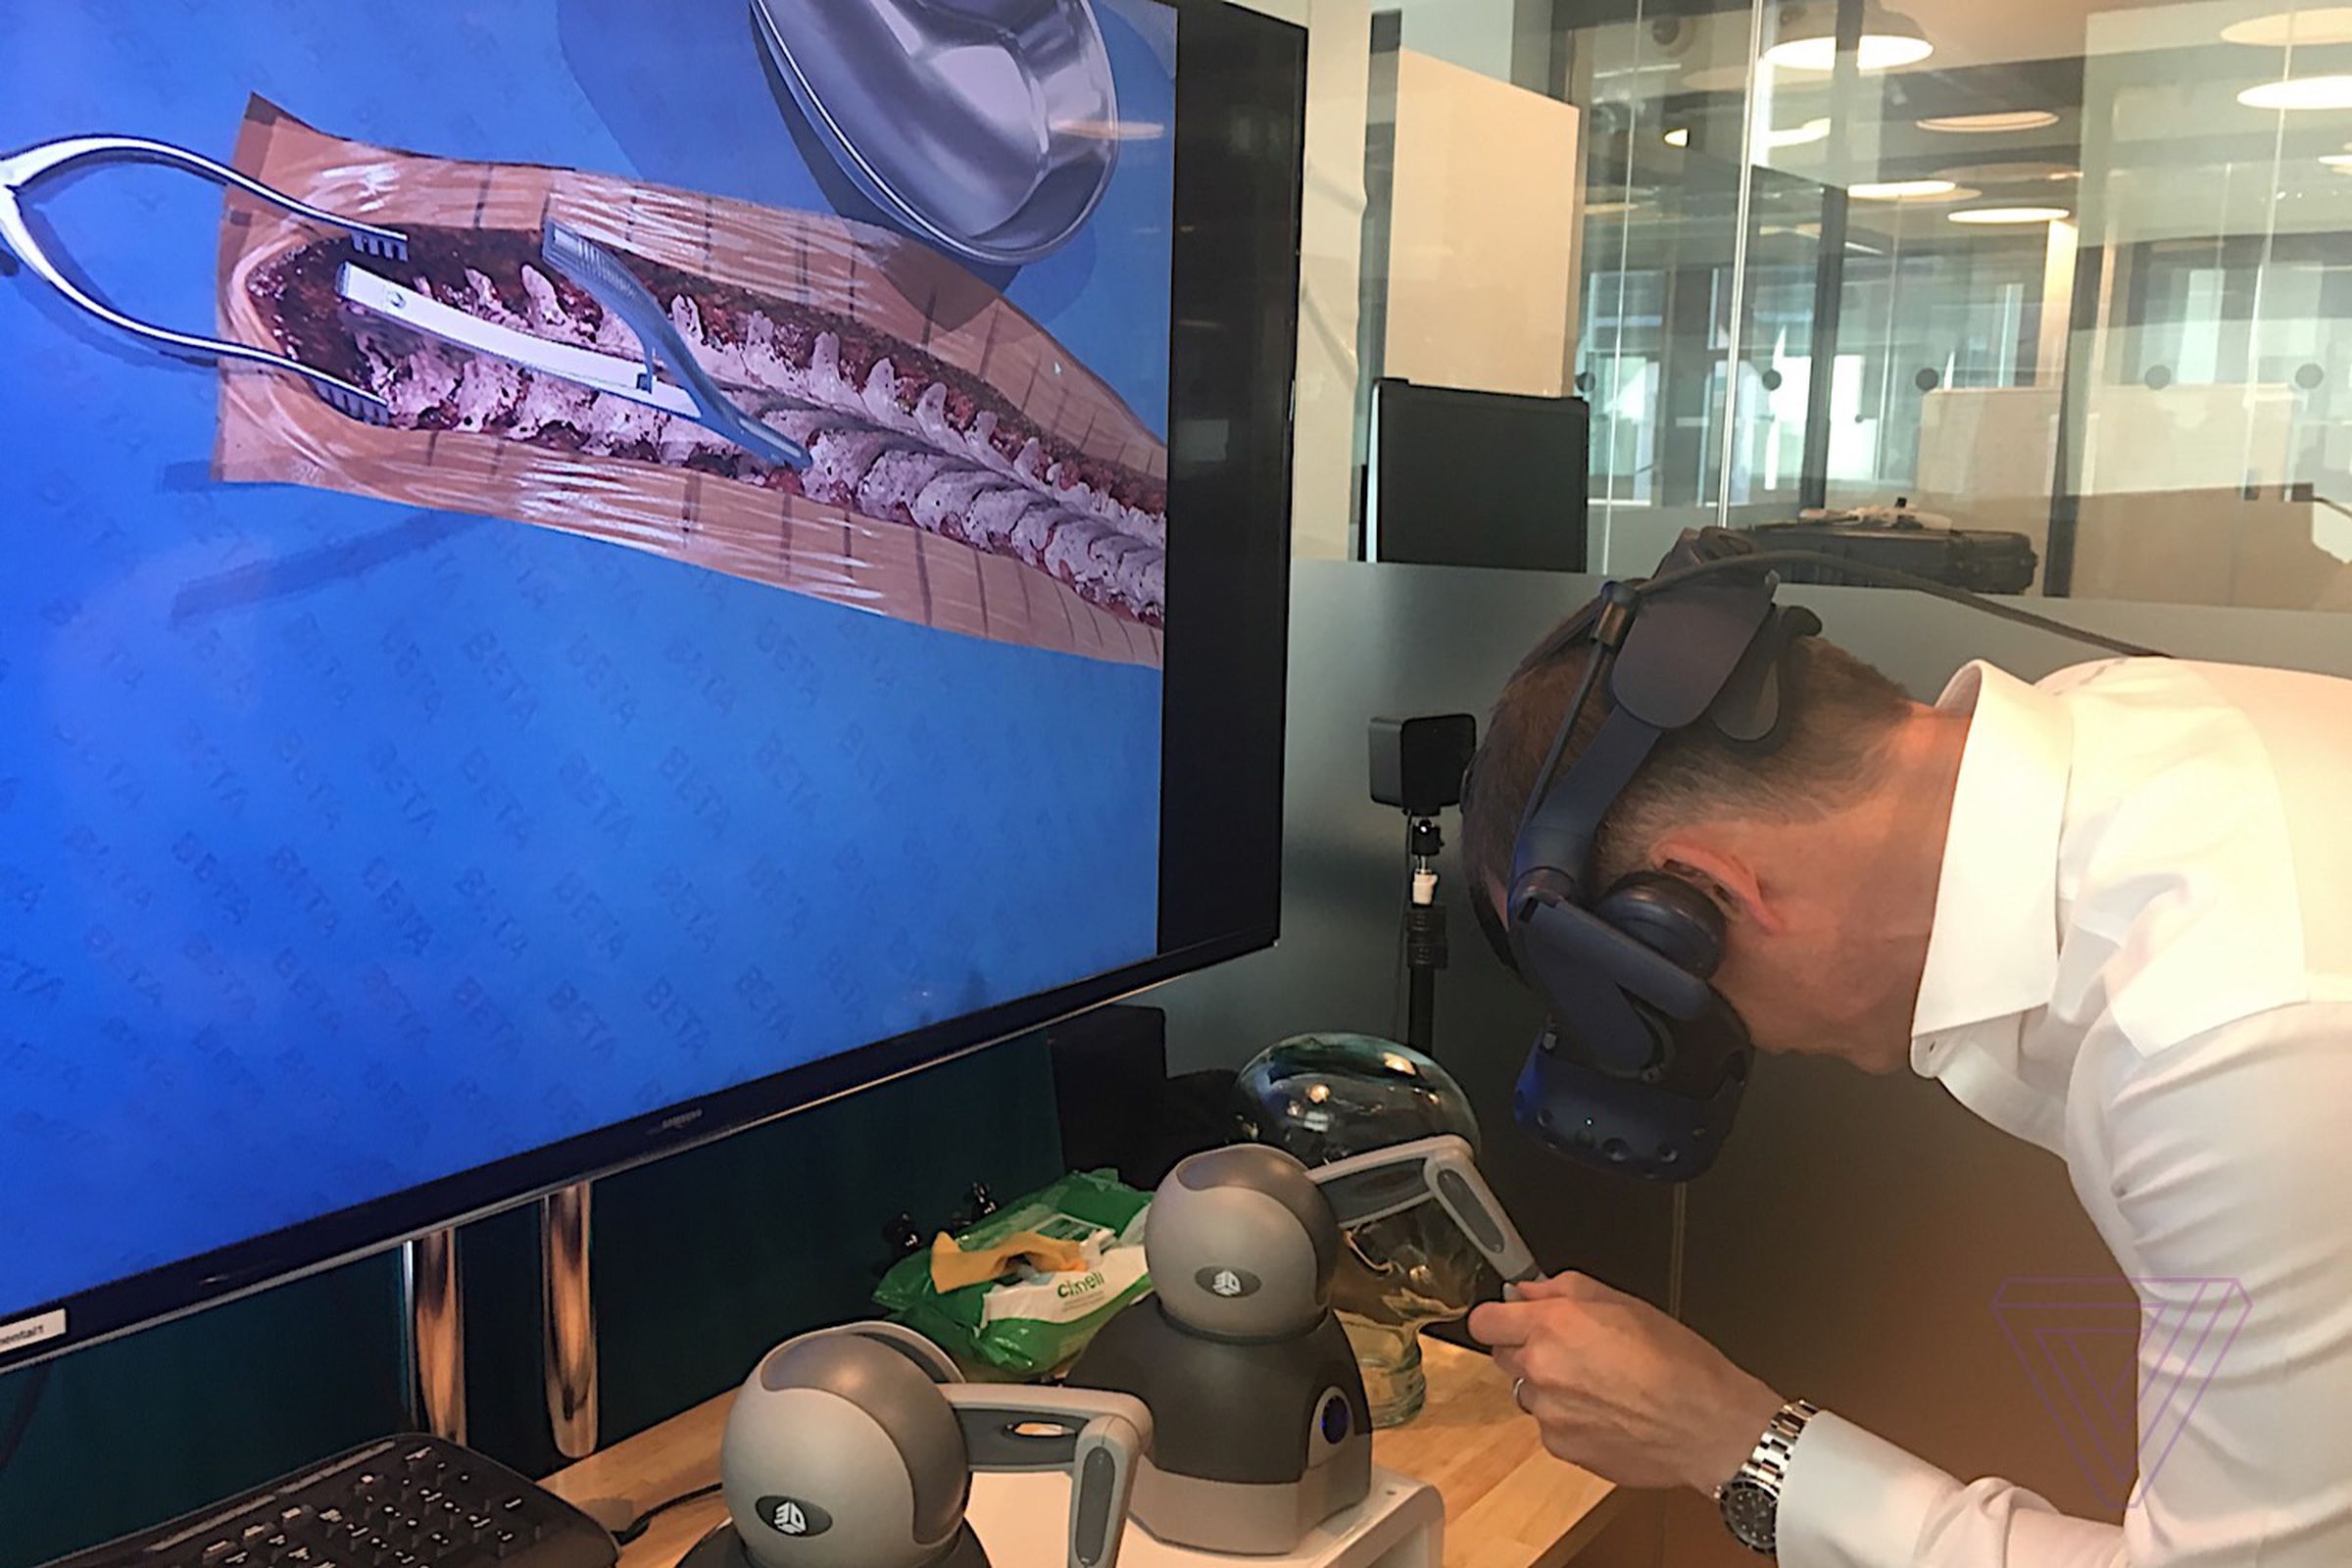 FundamentalVR CEO Richard Vincent demonstrates the company’s technology on a virtual spine.